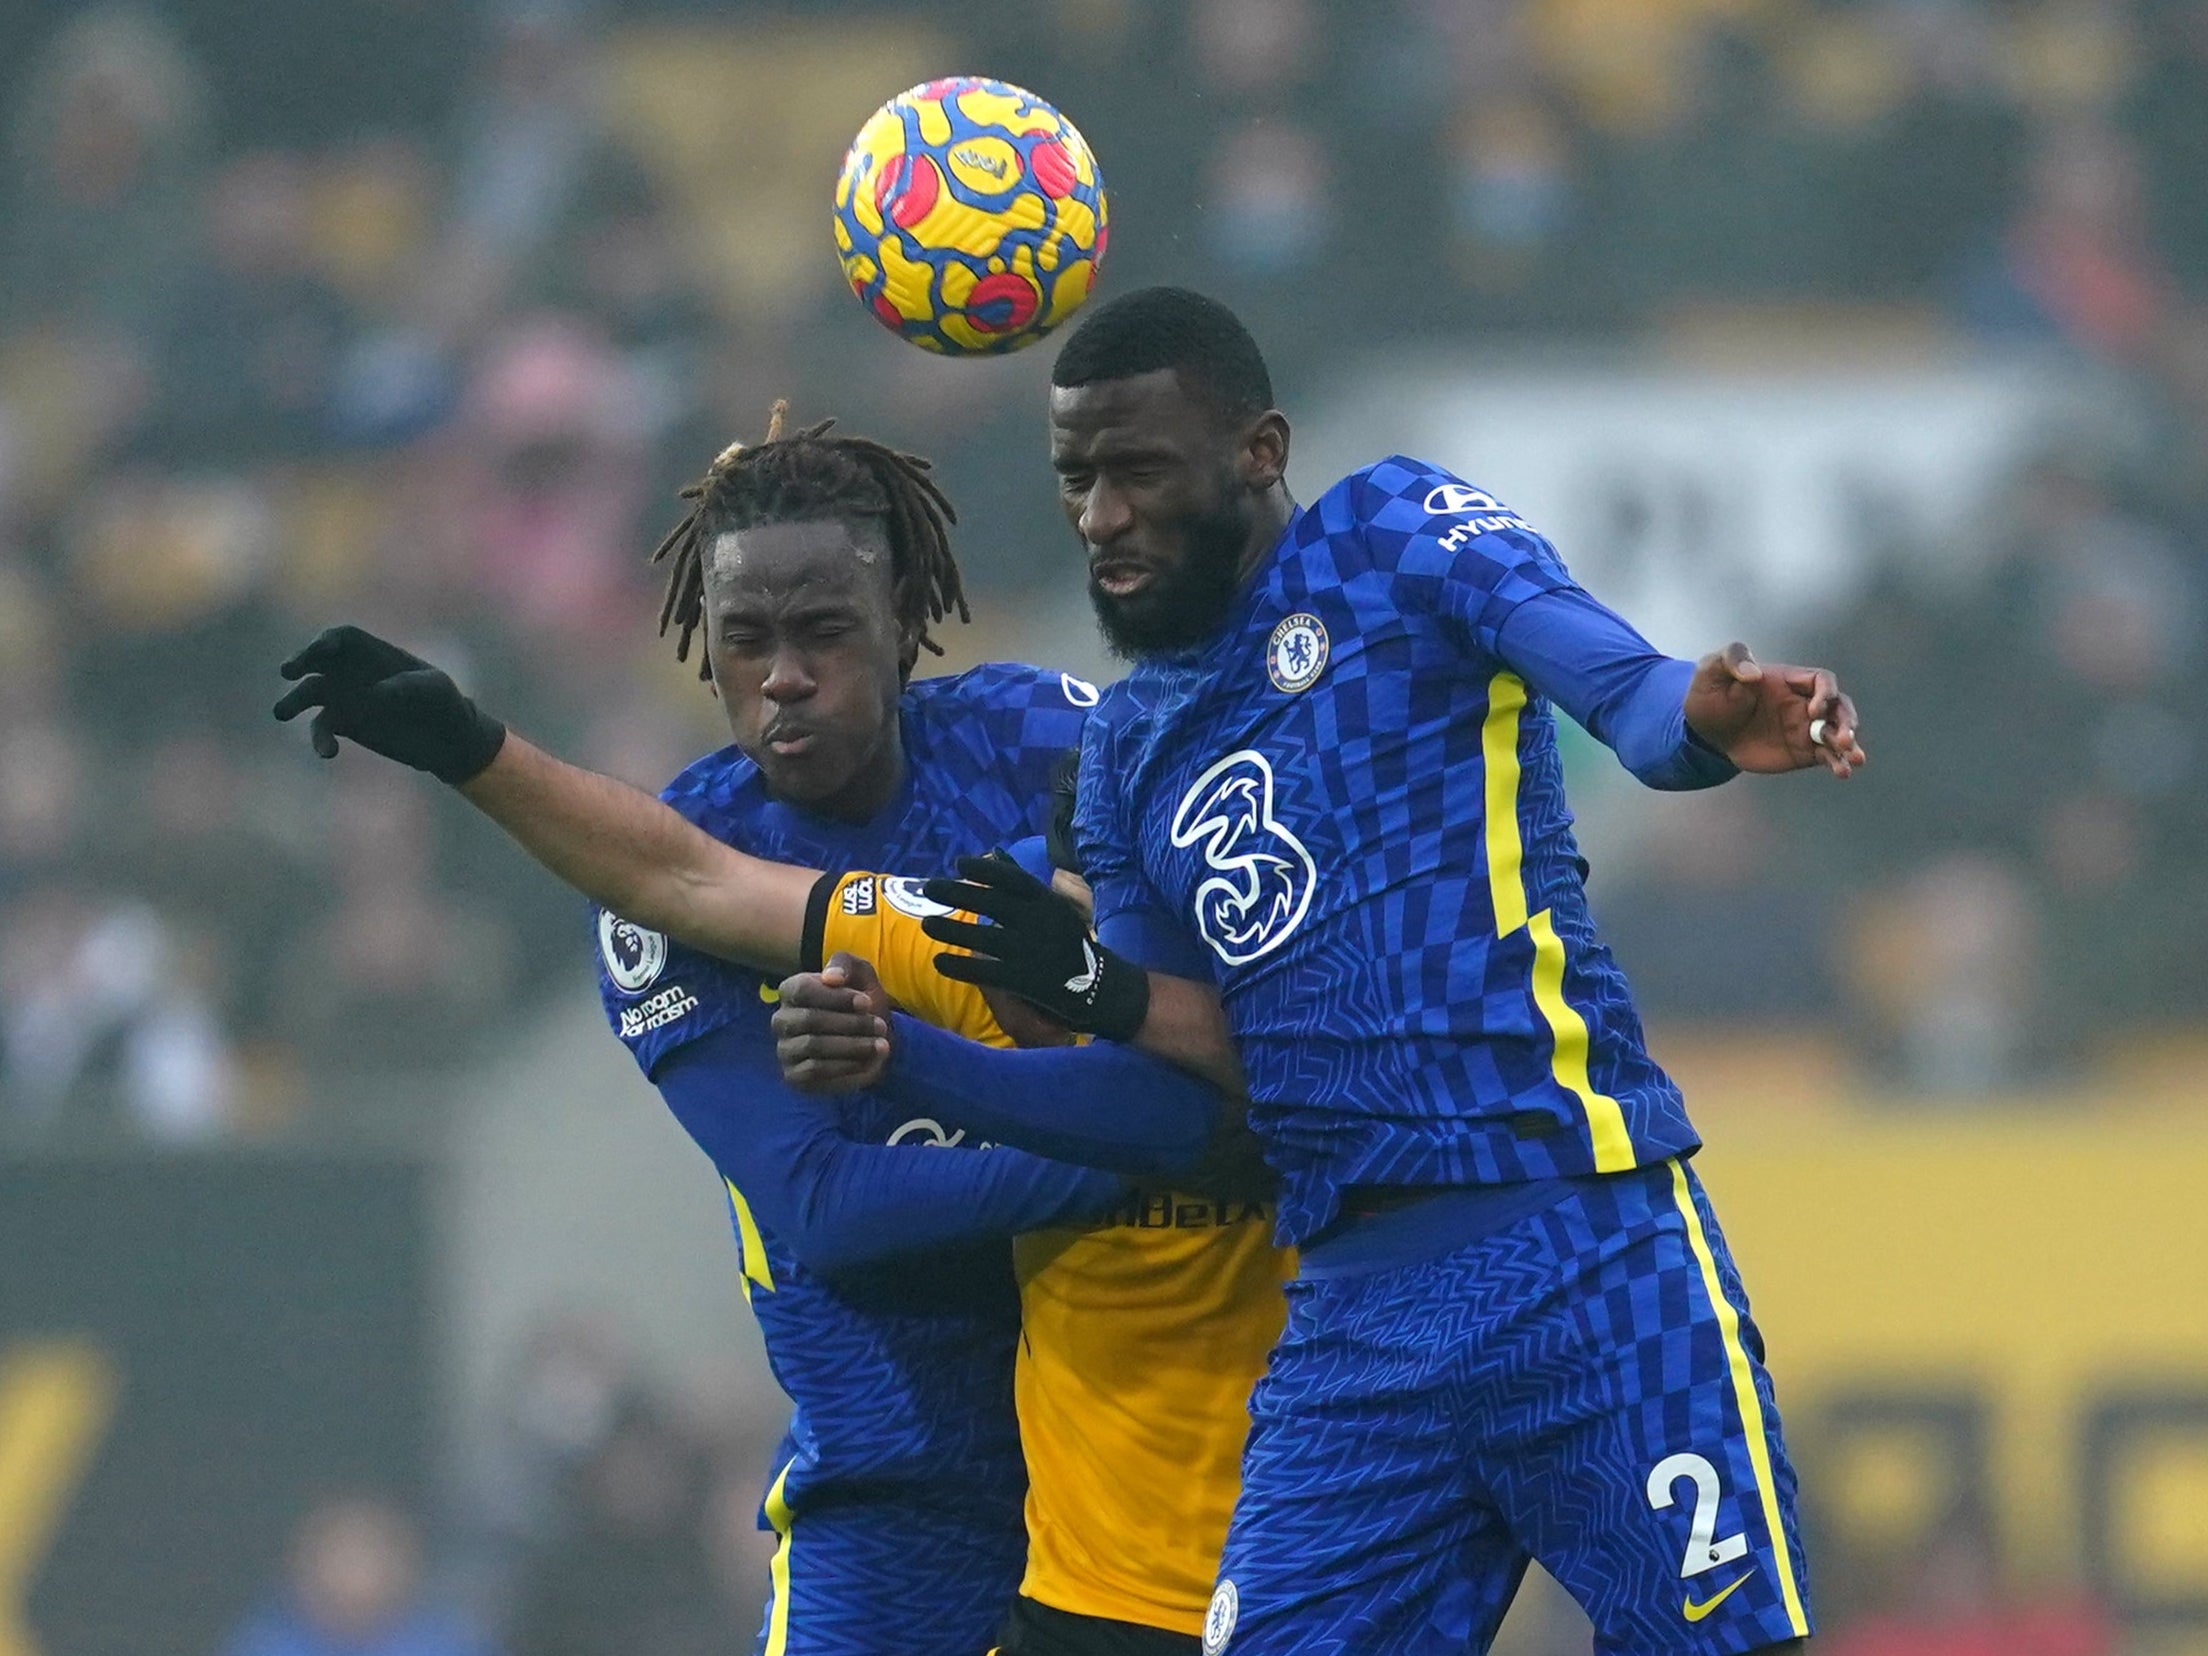 Toni Rudiger, right, challenges for the ball in Chelsea’s goalless draw at Wolves (Nick Potts/PA)